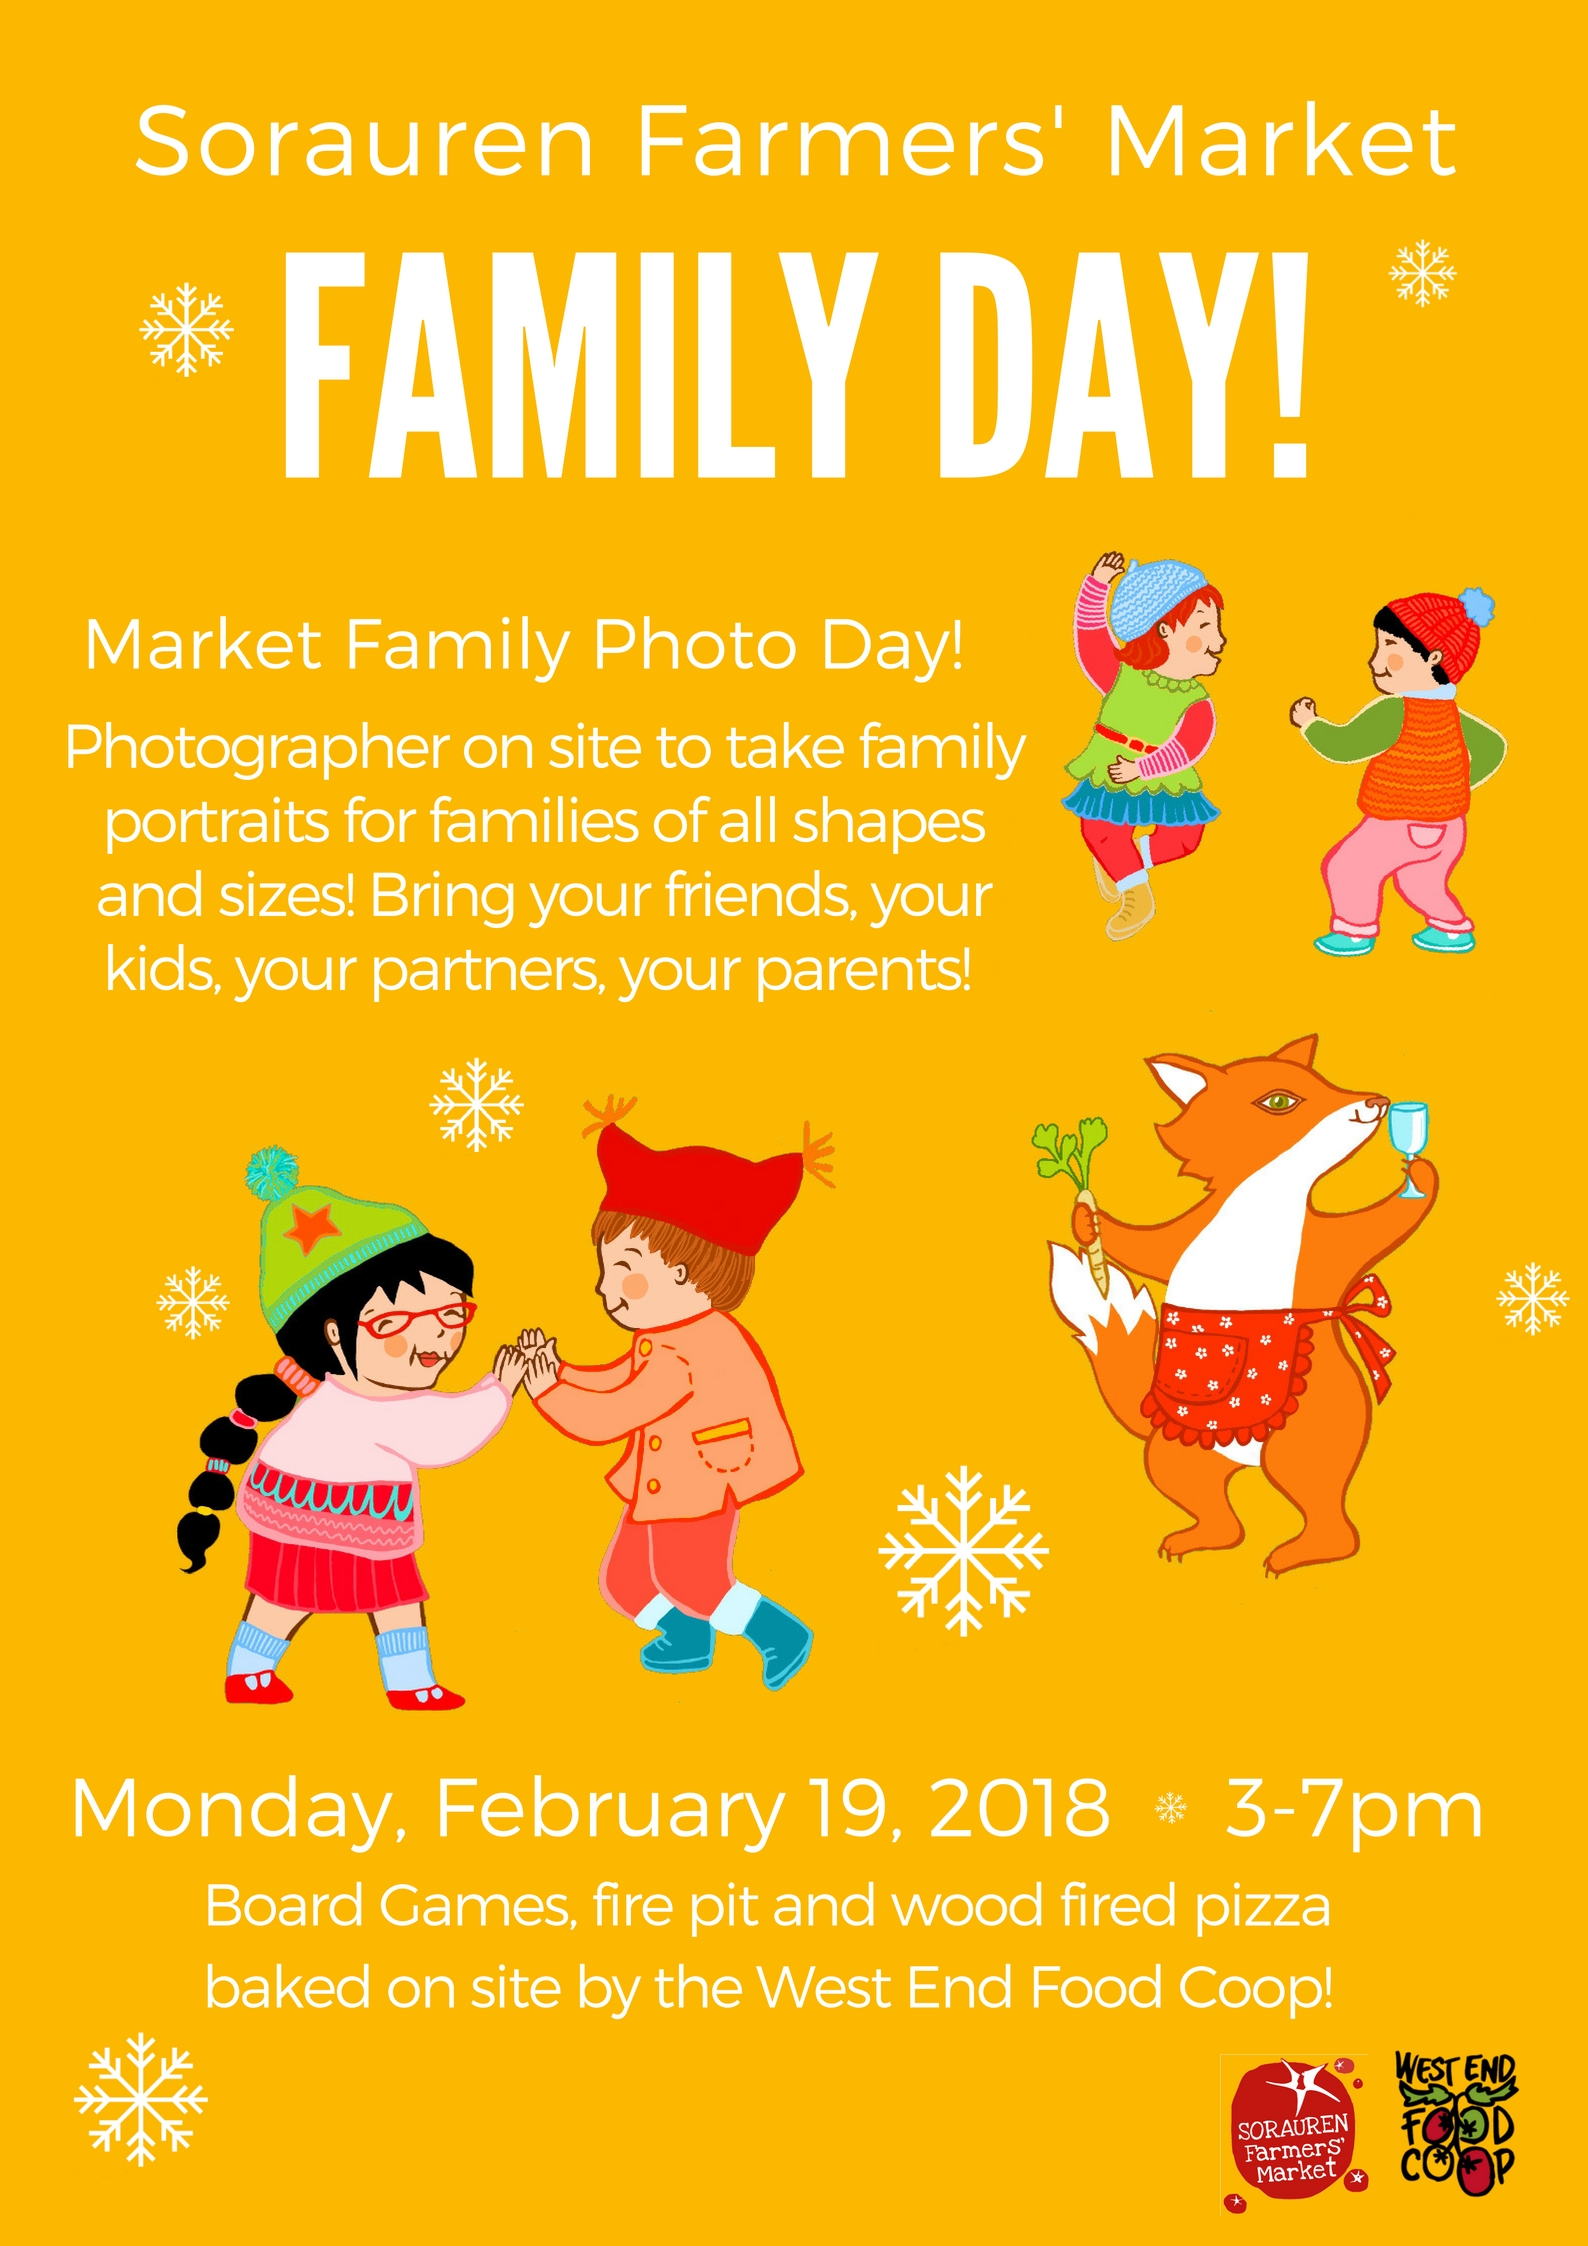 Celebrate Family Day with The West End Food Co-op and Friends of